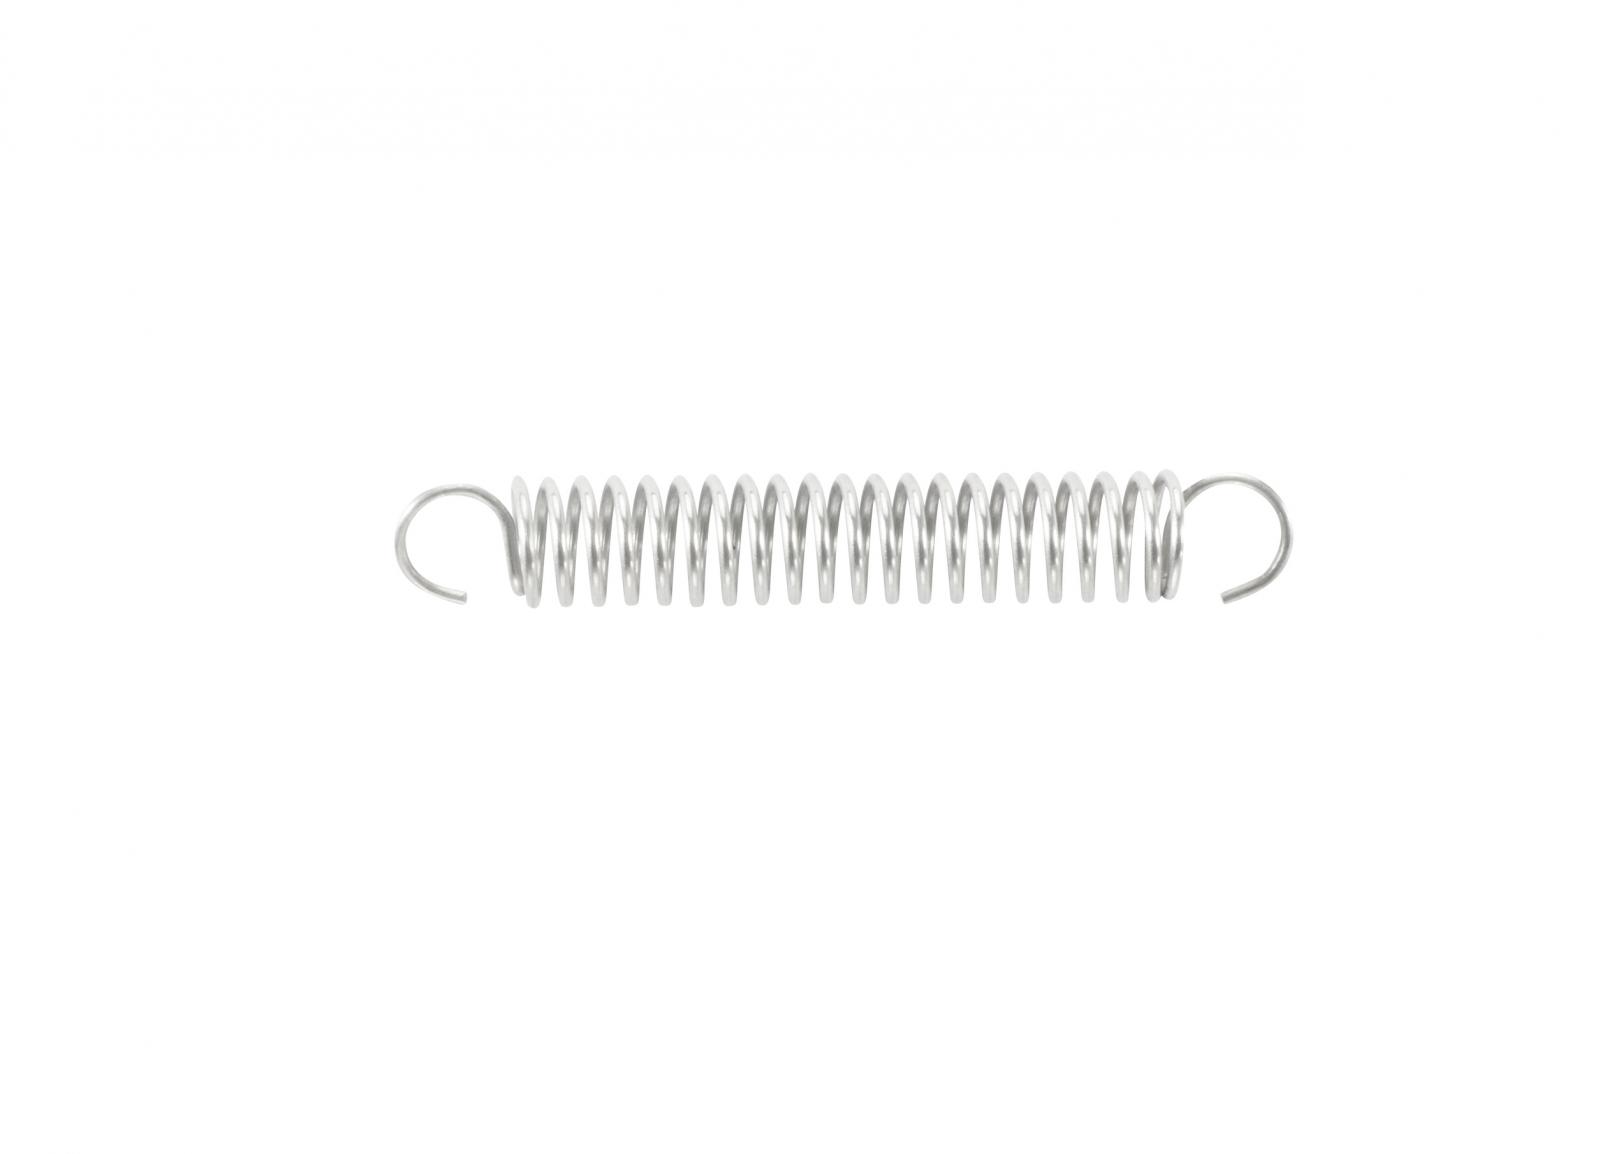 TapeTech® Creaser Spring. Part number 050081F